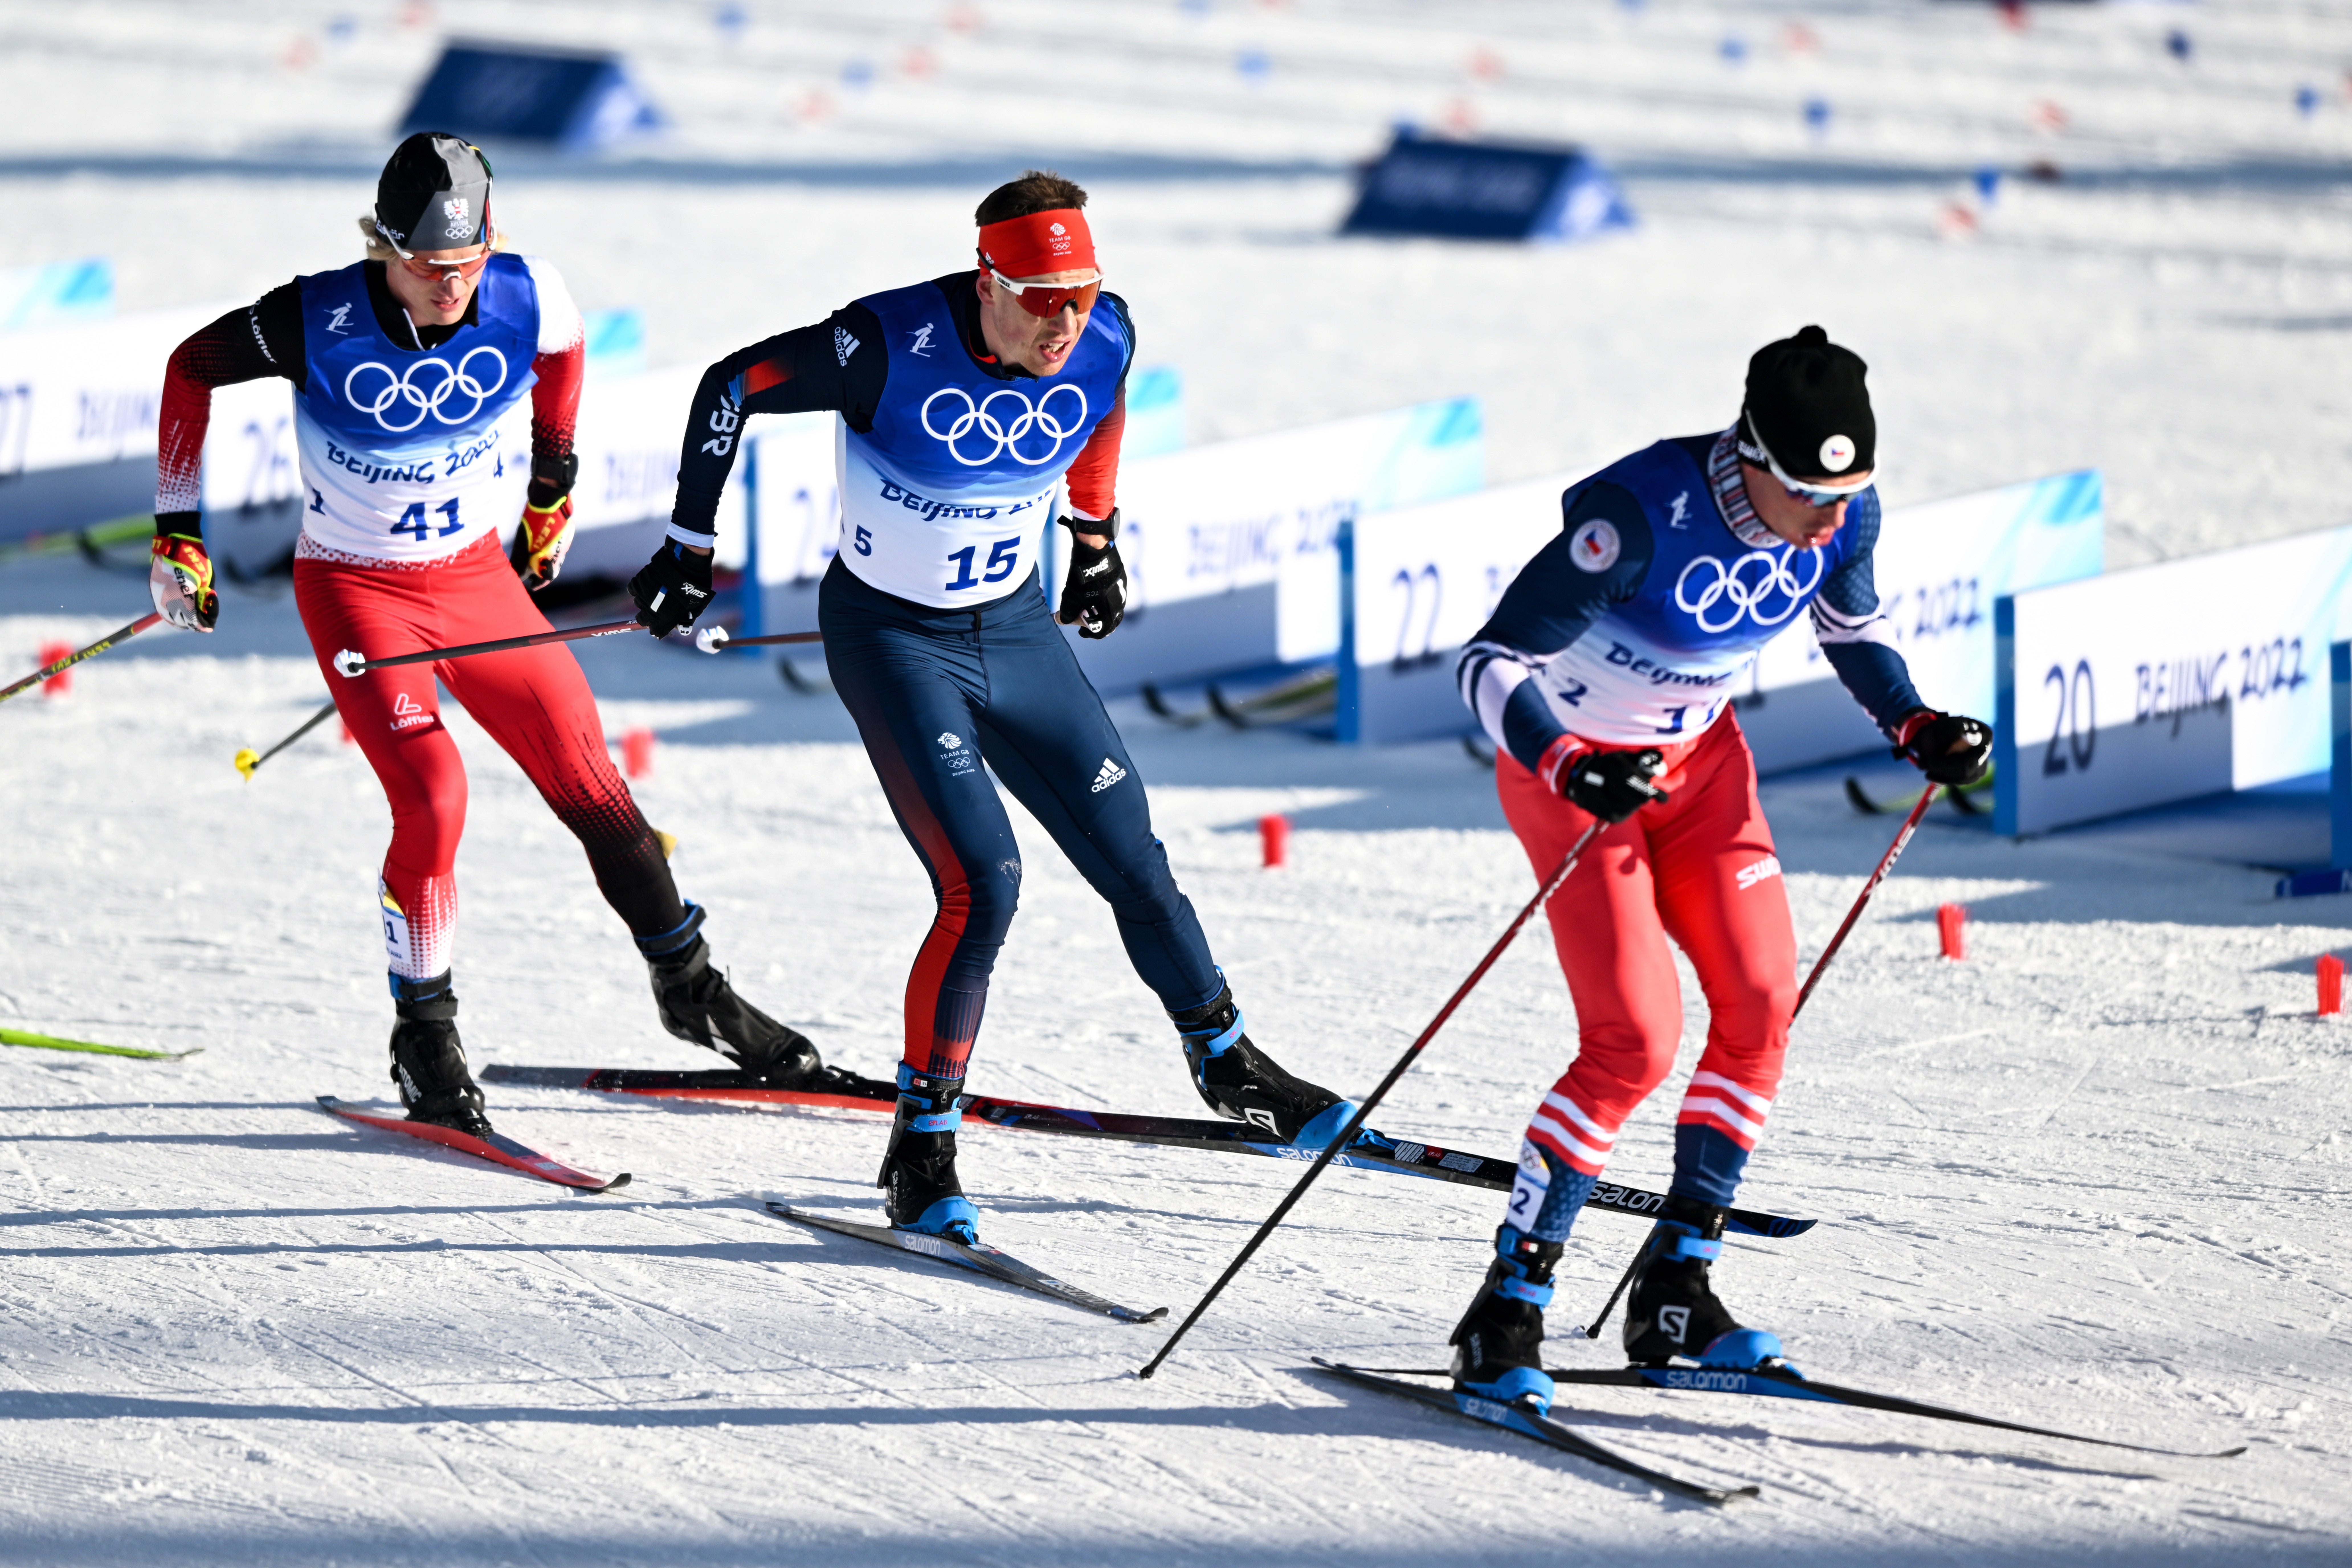 Great Britain’s Andrew Musgrave was infuriated by changes made to the cross-country skiing event (Henrik Schmidt via DPA/PA)